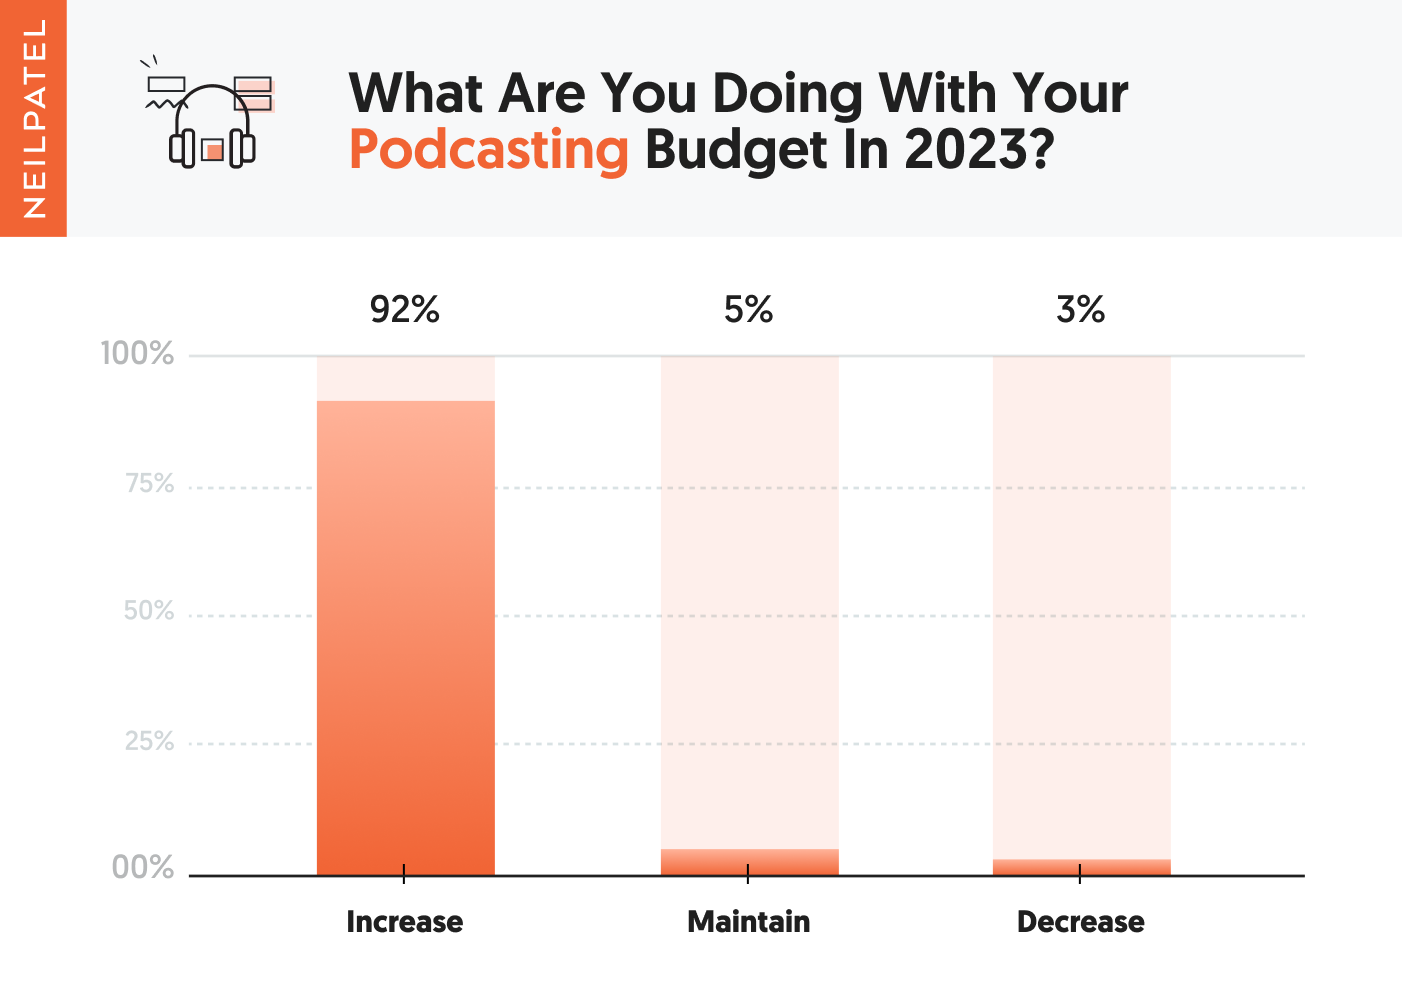 What are you doing with your podcasting budget in 2023